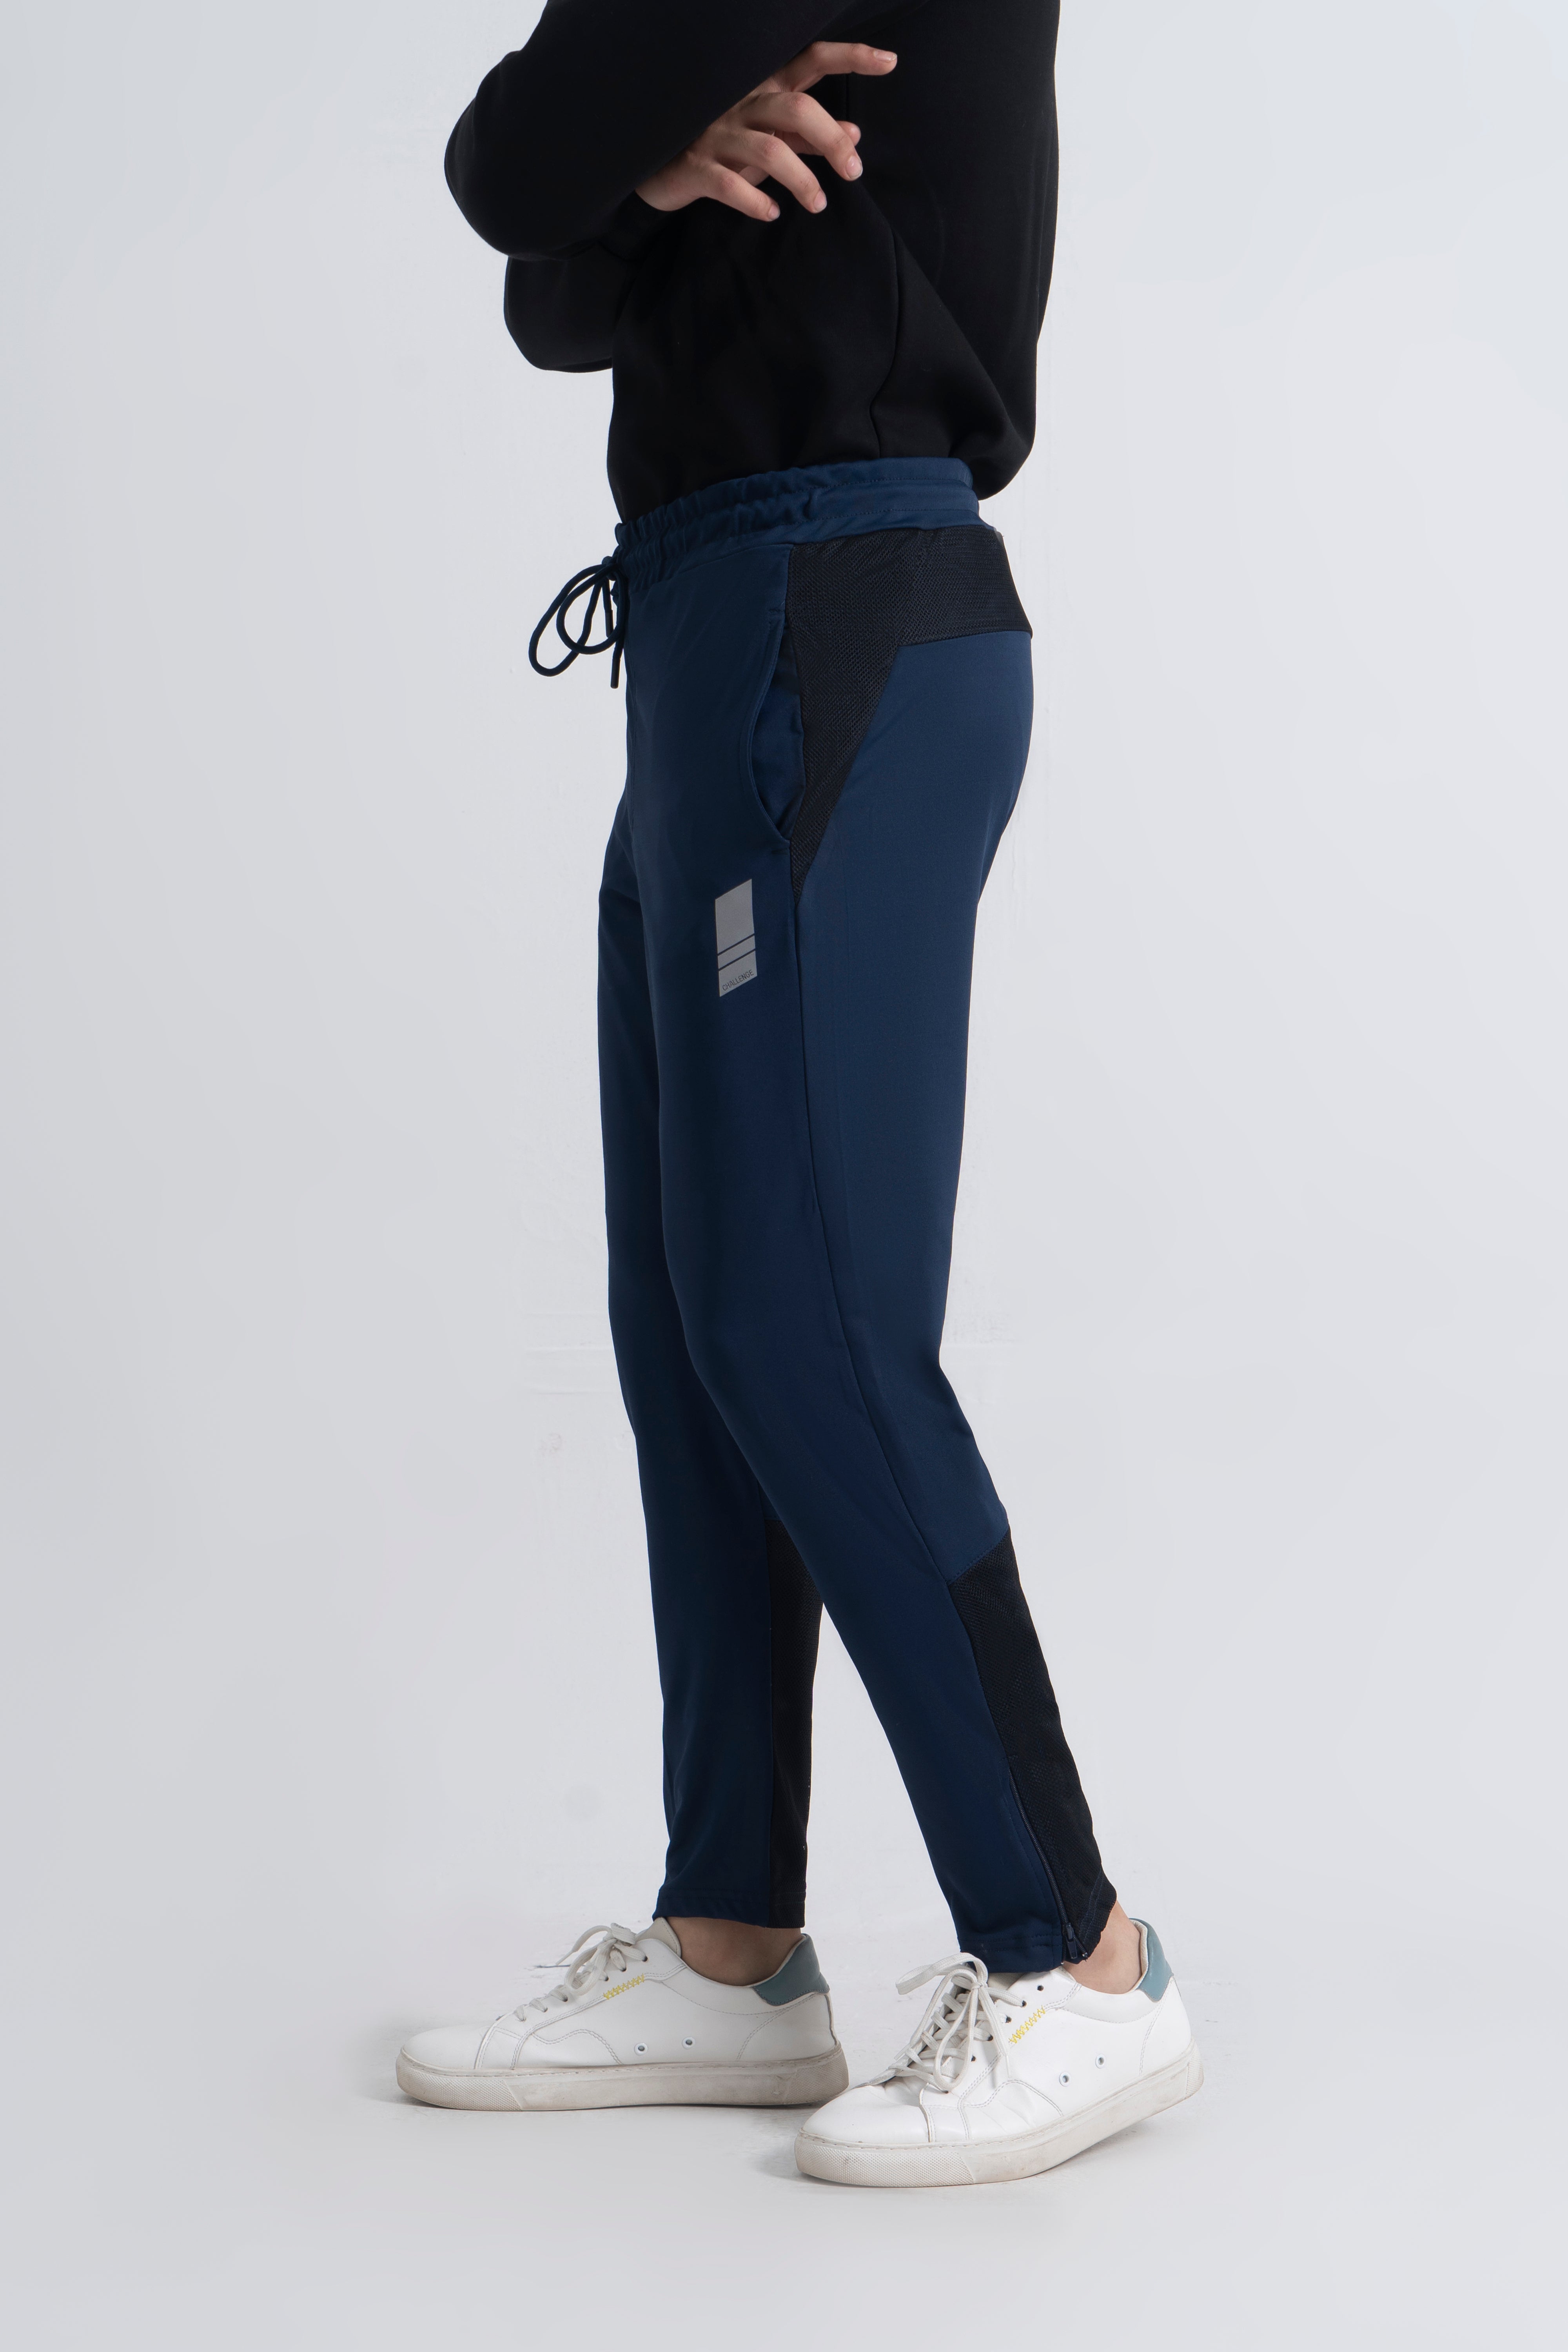 Navy Dry Fit Trousers